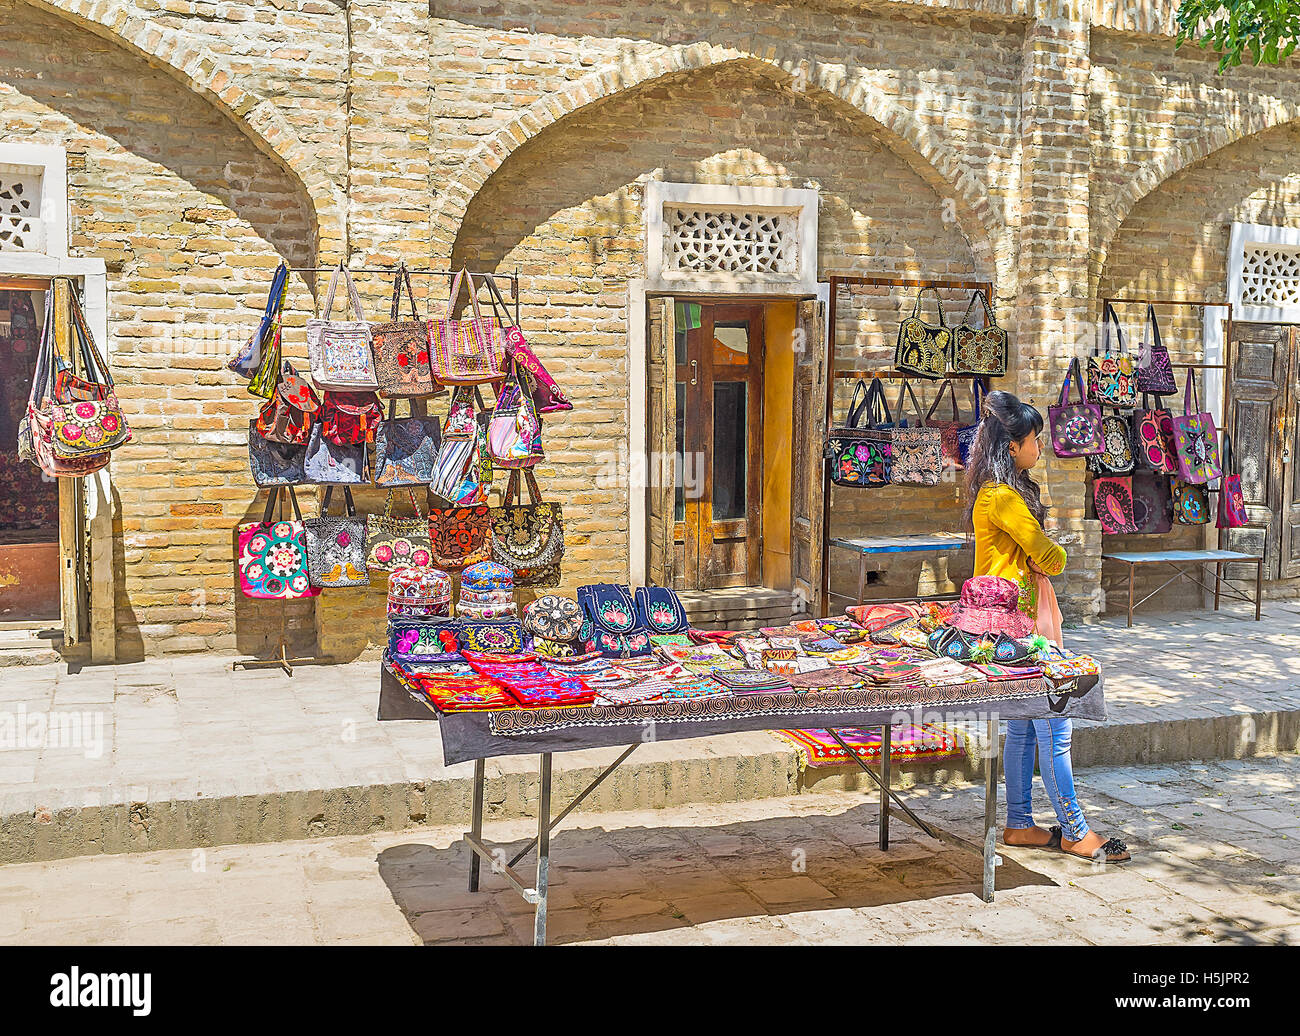 The stall with the handmade colored bags, decorated with the floral embroideries Stock Photo